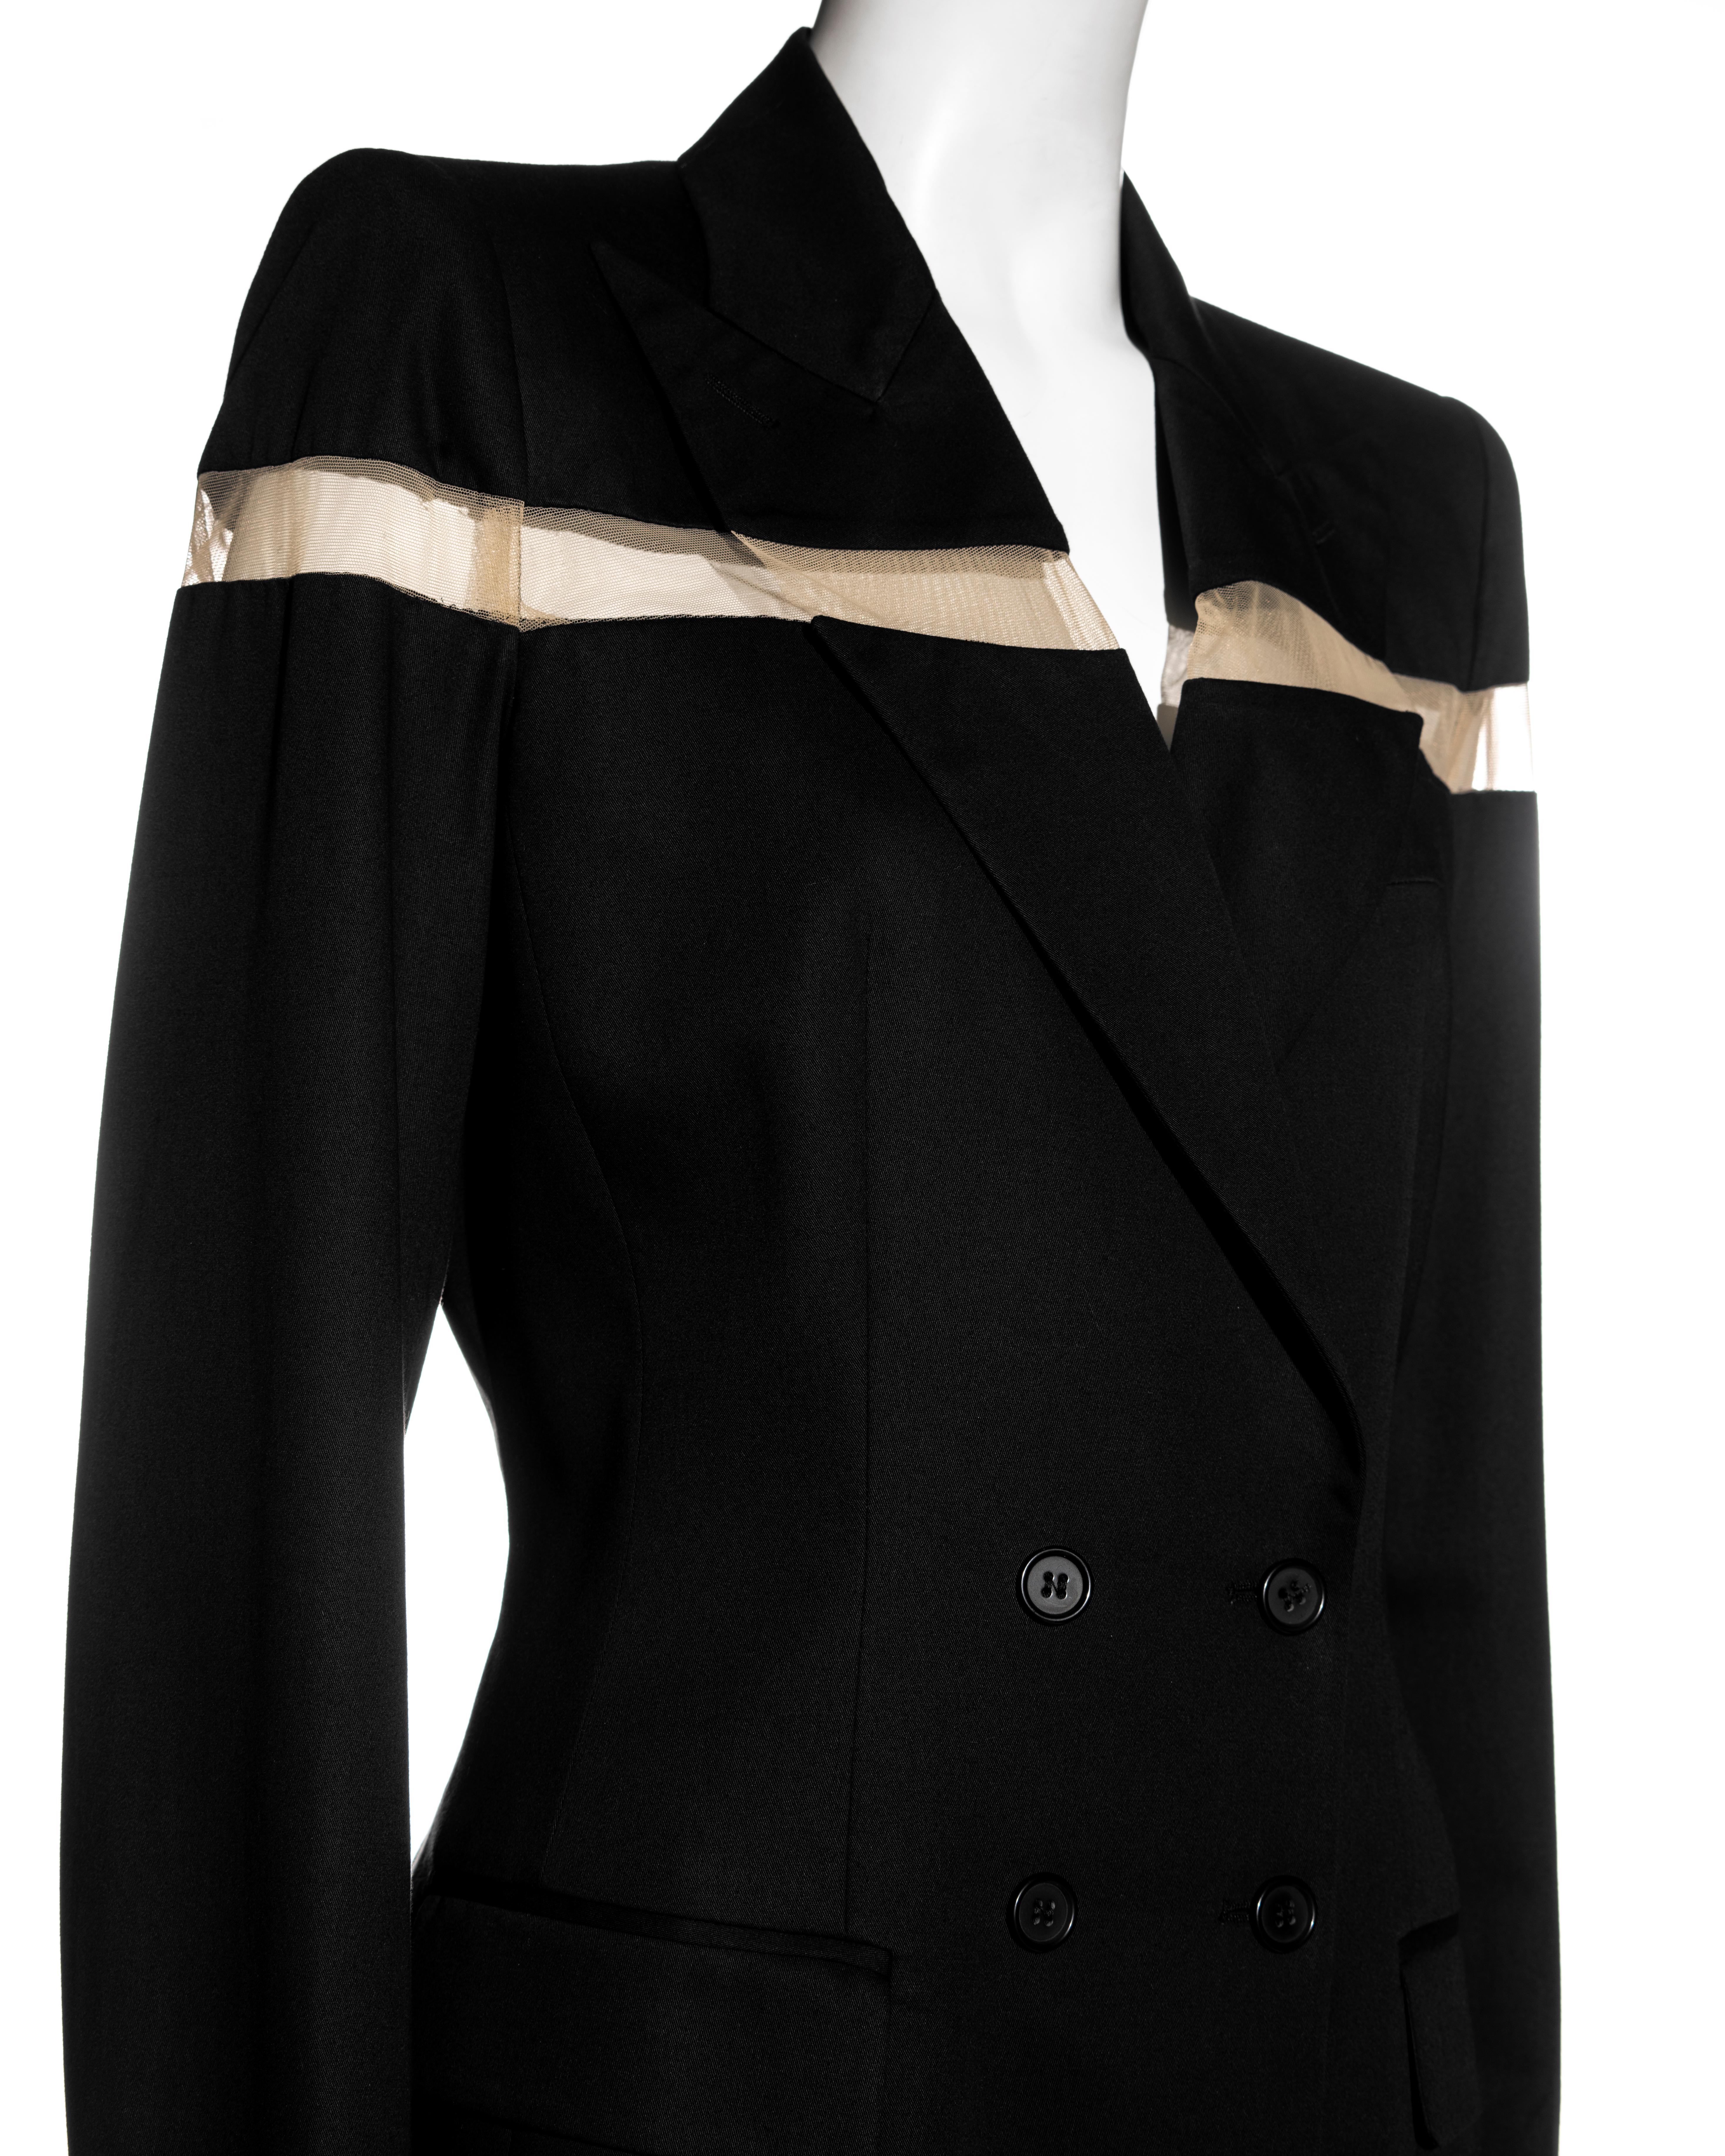 Women's Alexander McQueen black double-breasted blazer mini dress with cut-out, ss 1998 For Sale